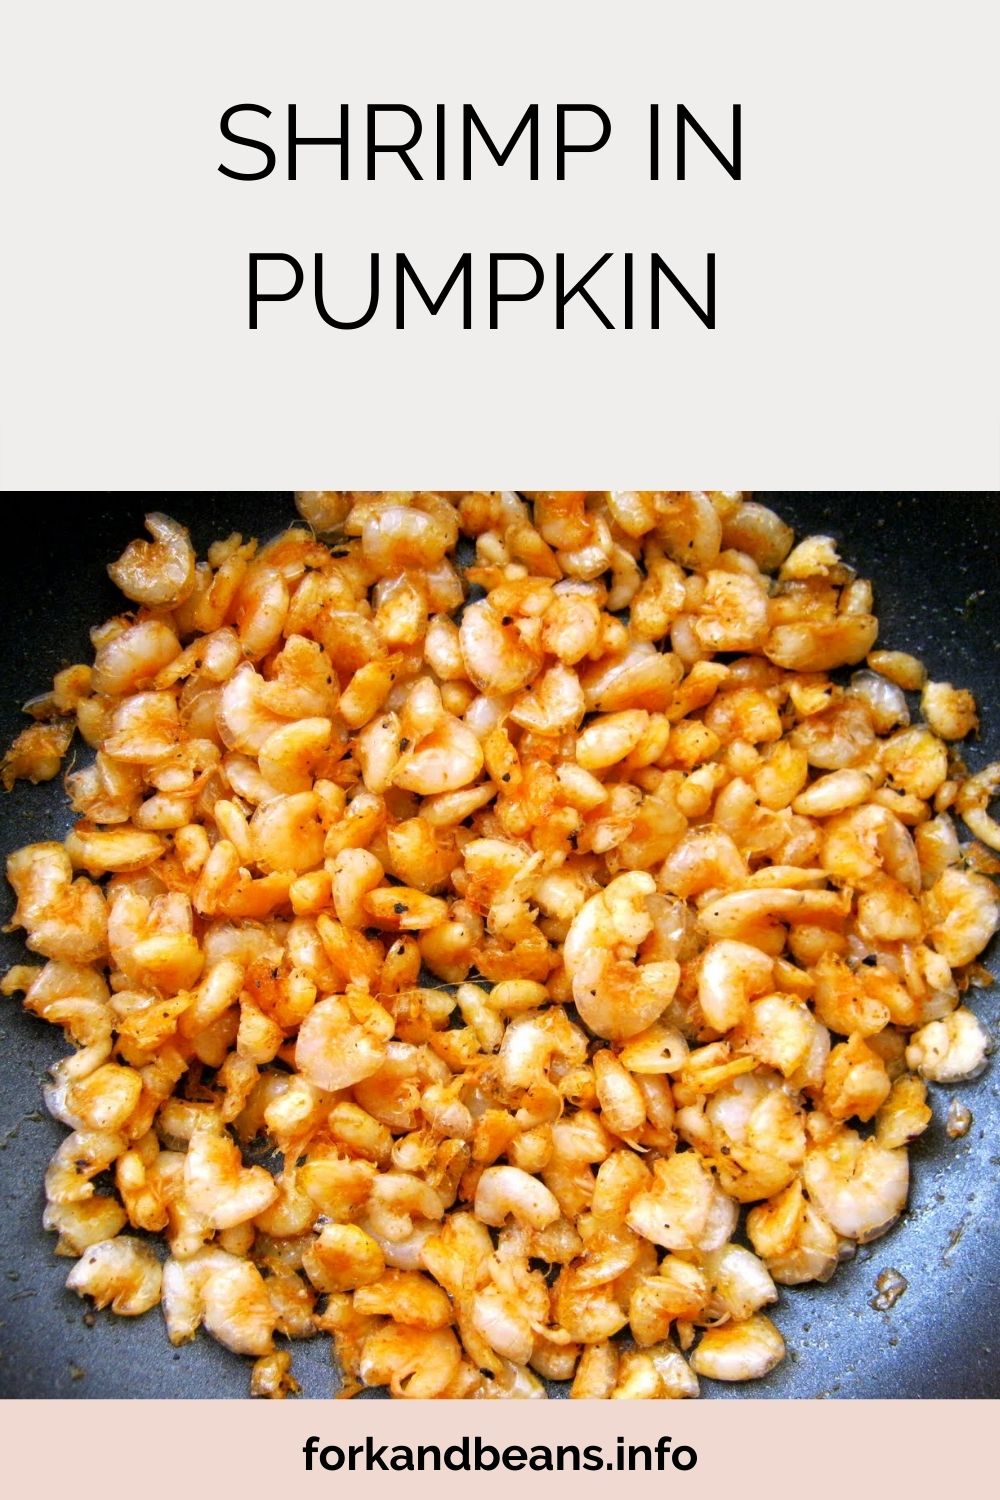 Guyanan fashion PUMPKIN WITH WHITE BELLY SHRIMP IN A FRYER